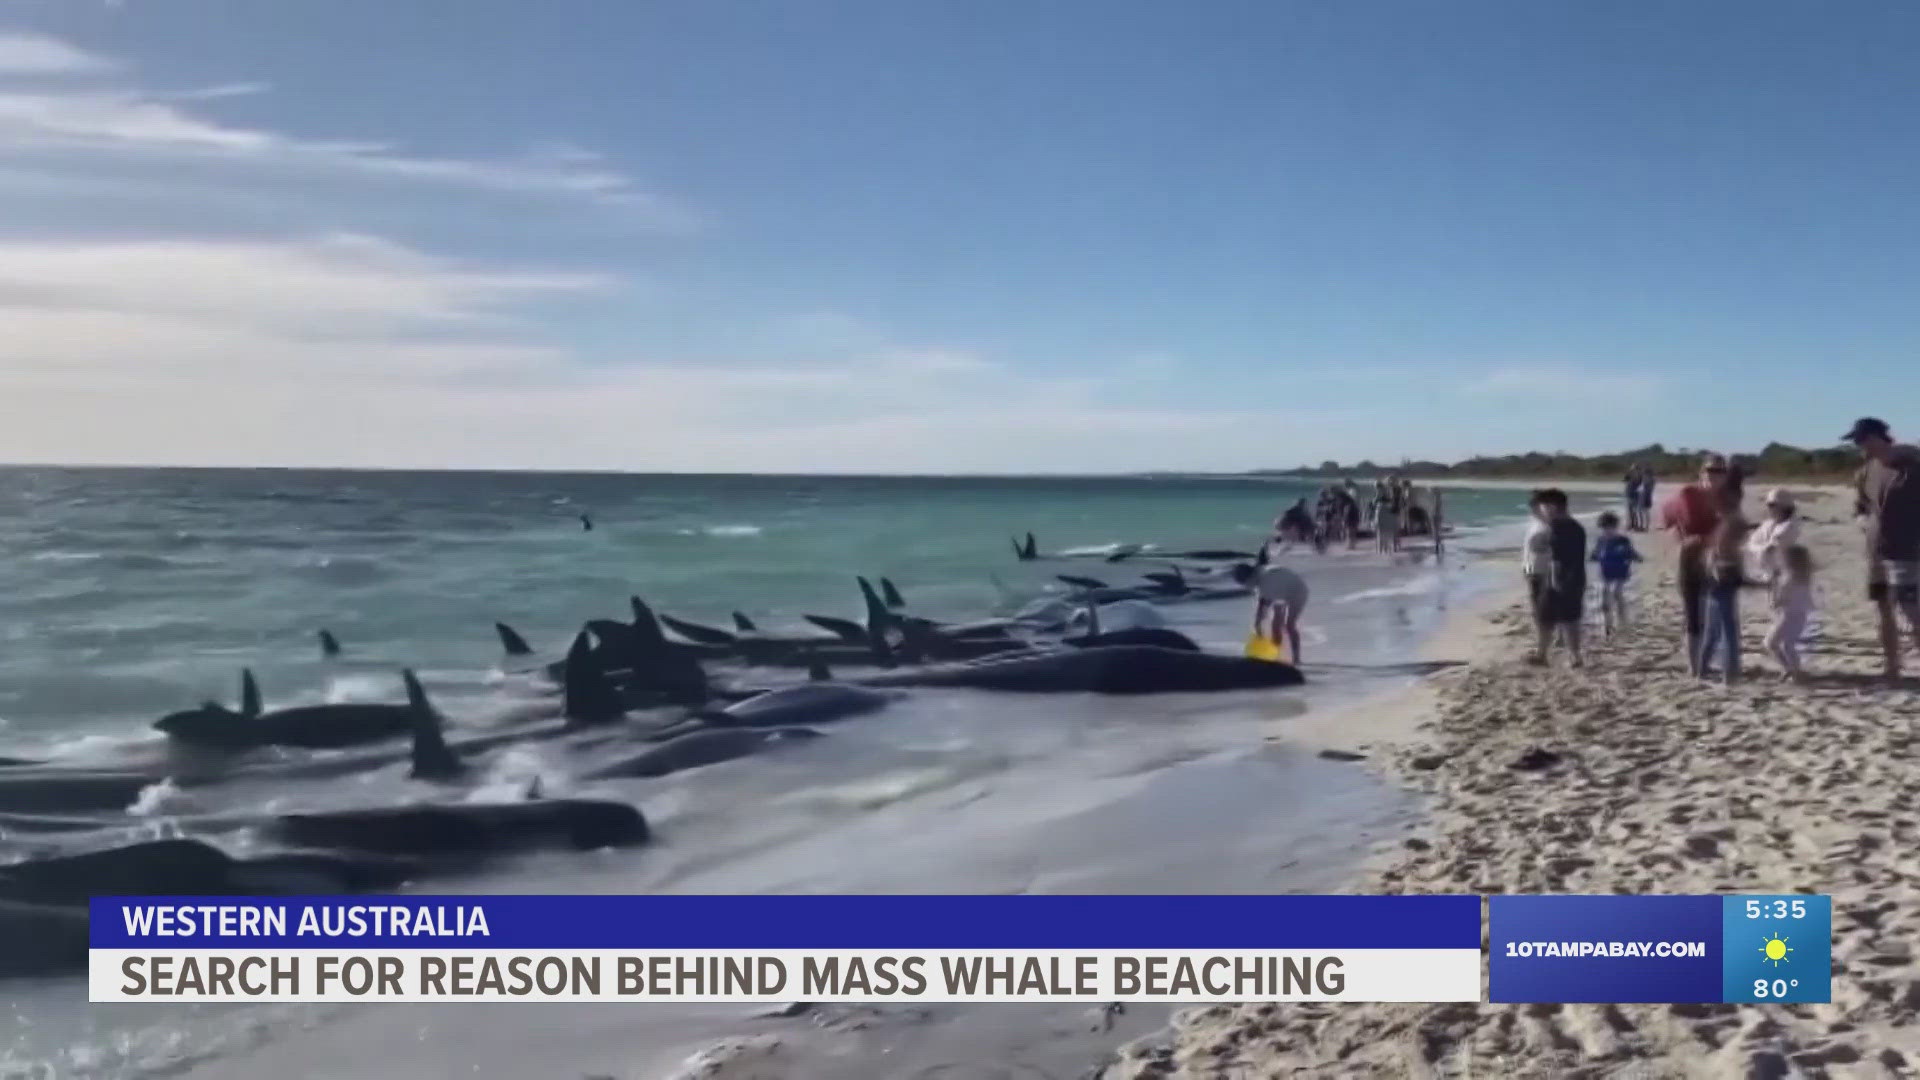 It’s not always clear why whales beach themselves, but experts believe injuries and illnesses to one or more animals in the pod could contribute to the phenomenon.